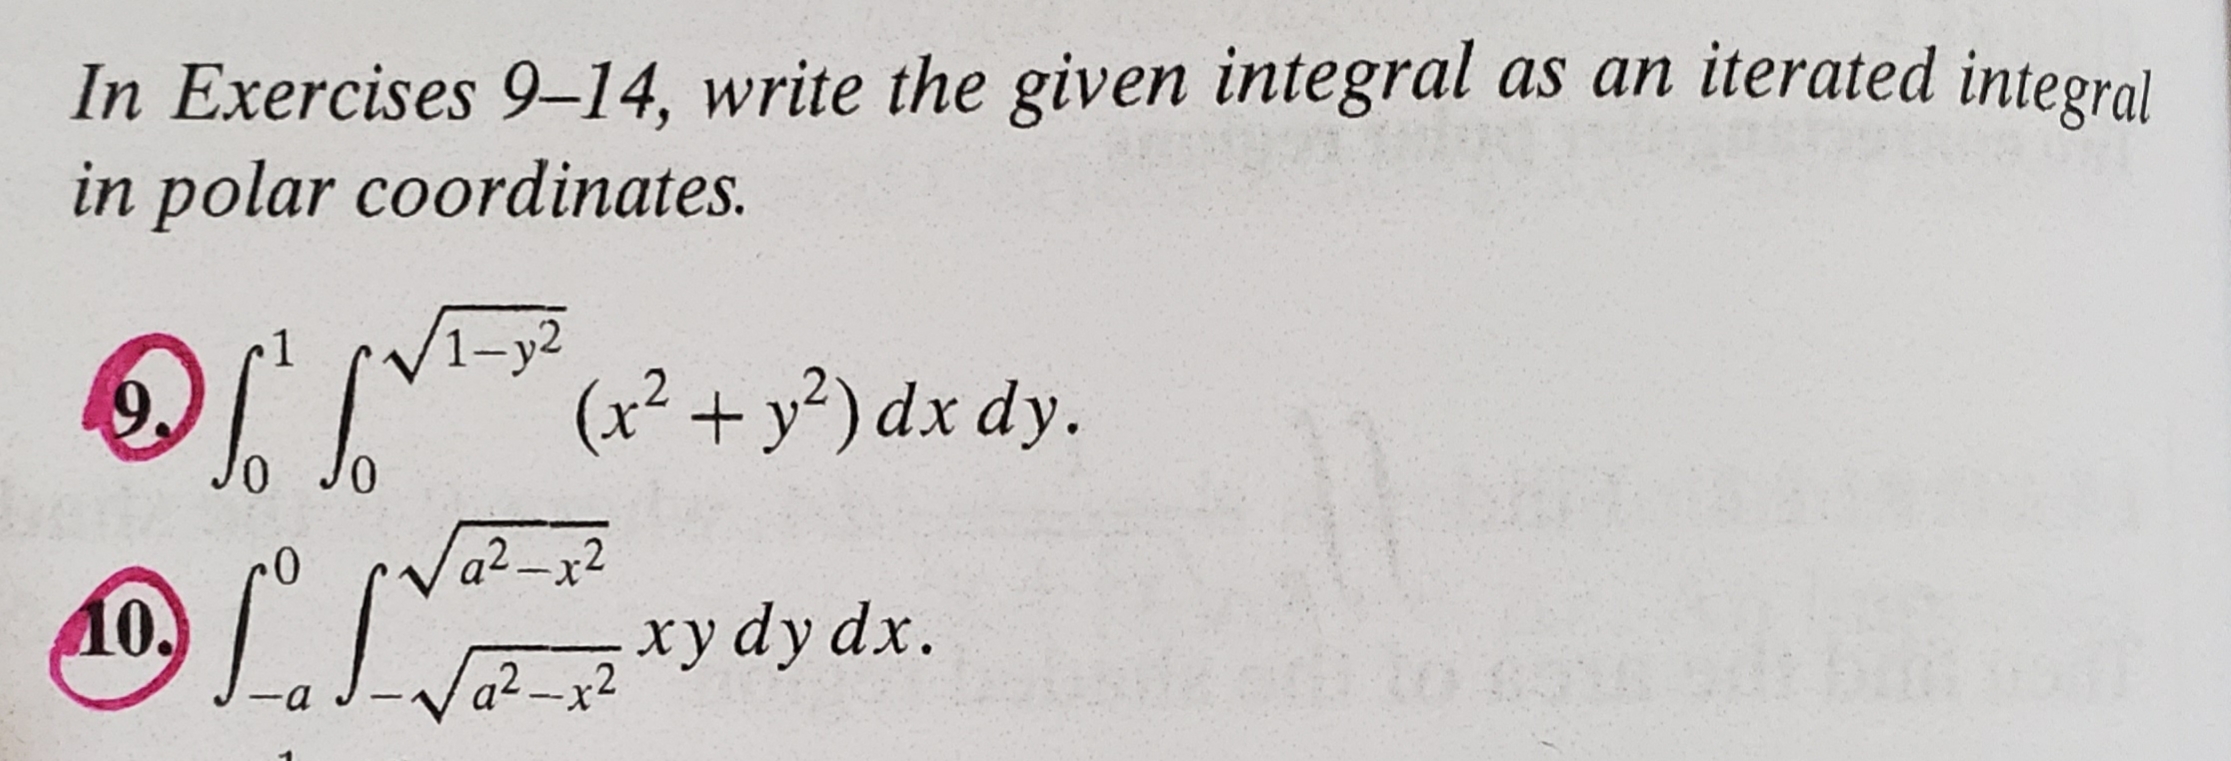 In Exercises 9-14, write the given integral as an iterated integral
in polar coordinates.
/1-у2
(x2+y2) dx dy.
9.
a2-x2
xy dy dx
Va2-x2
a
